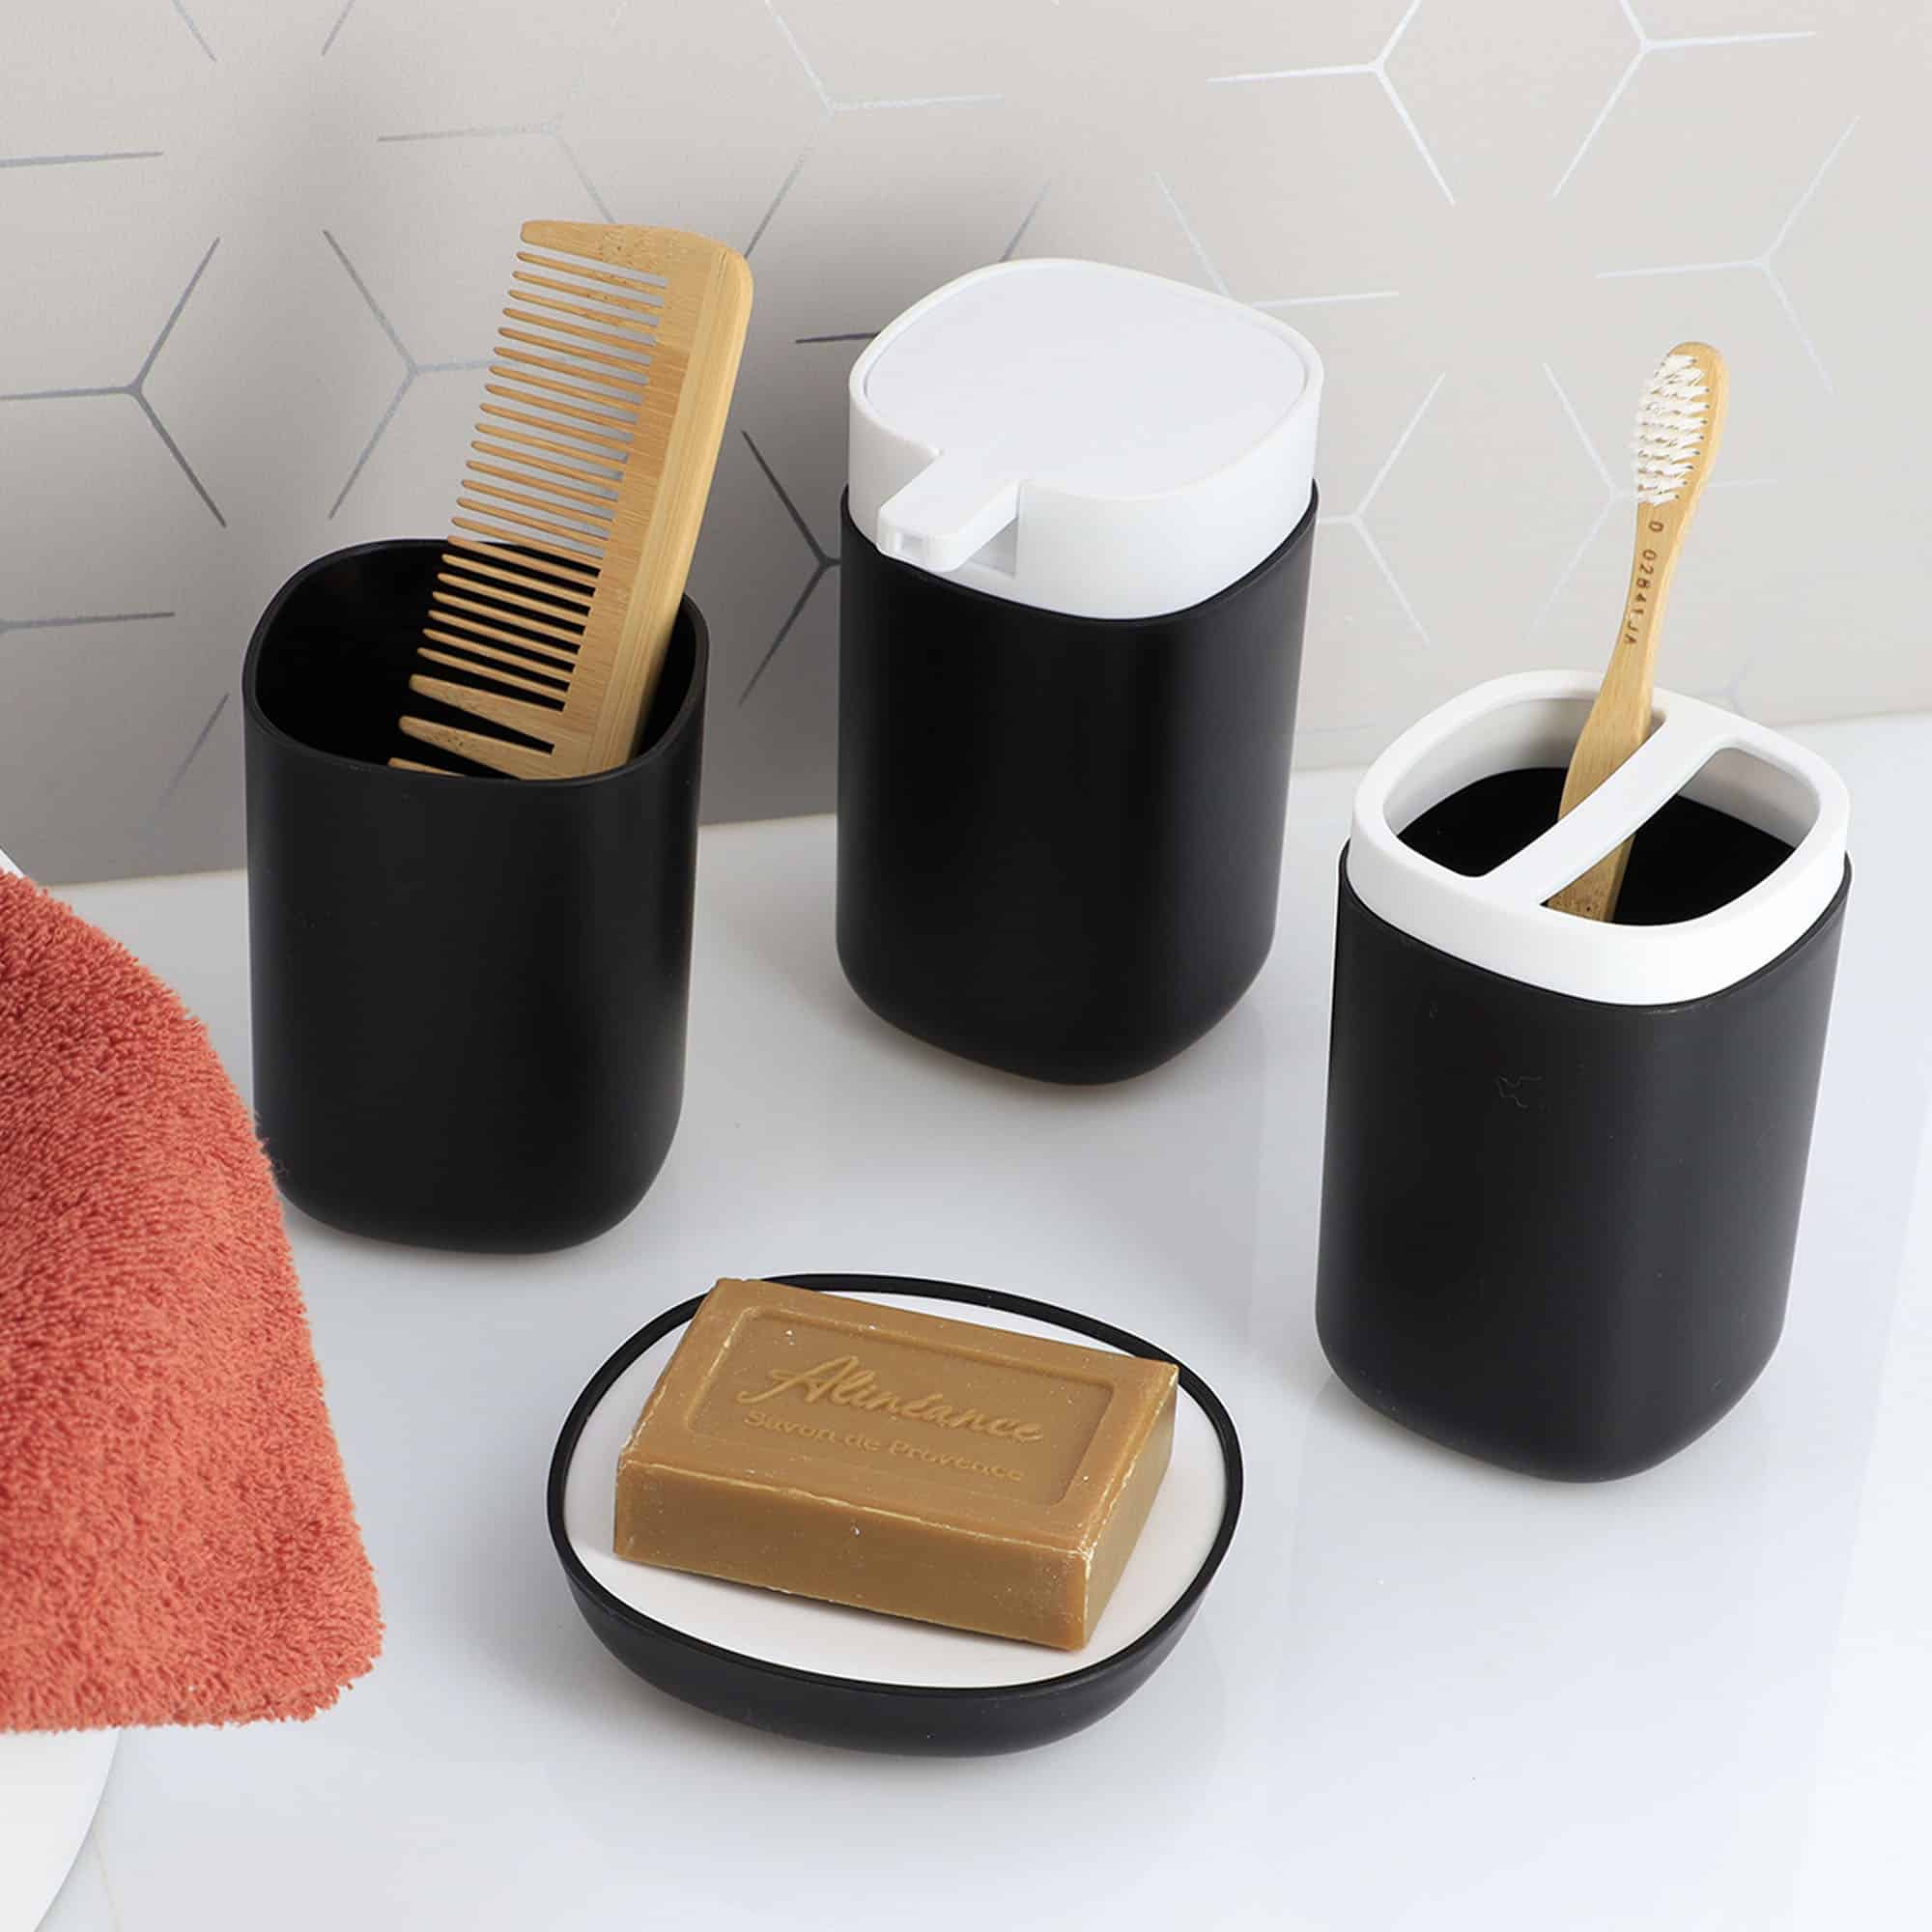 Minimalist bicolor ensemble for clean bathroom counter, perfect to hold bar soap, toothbrush, brushes and combs, make up accessories